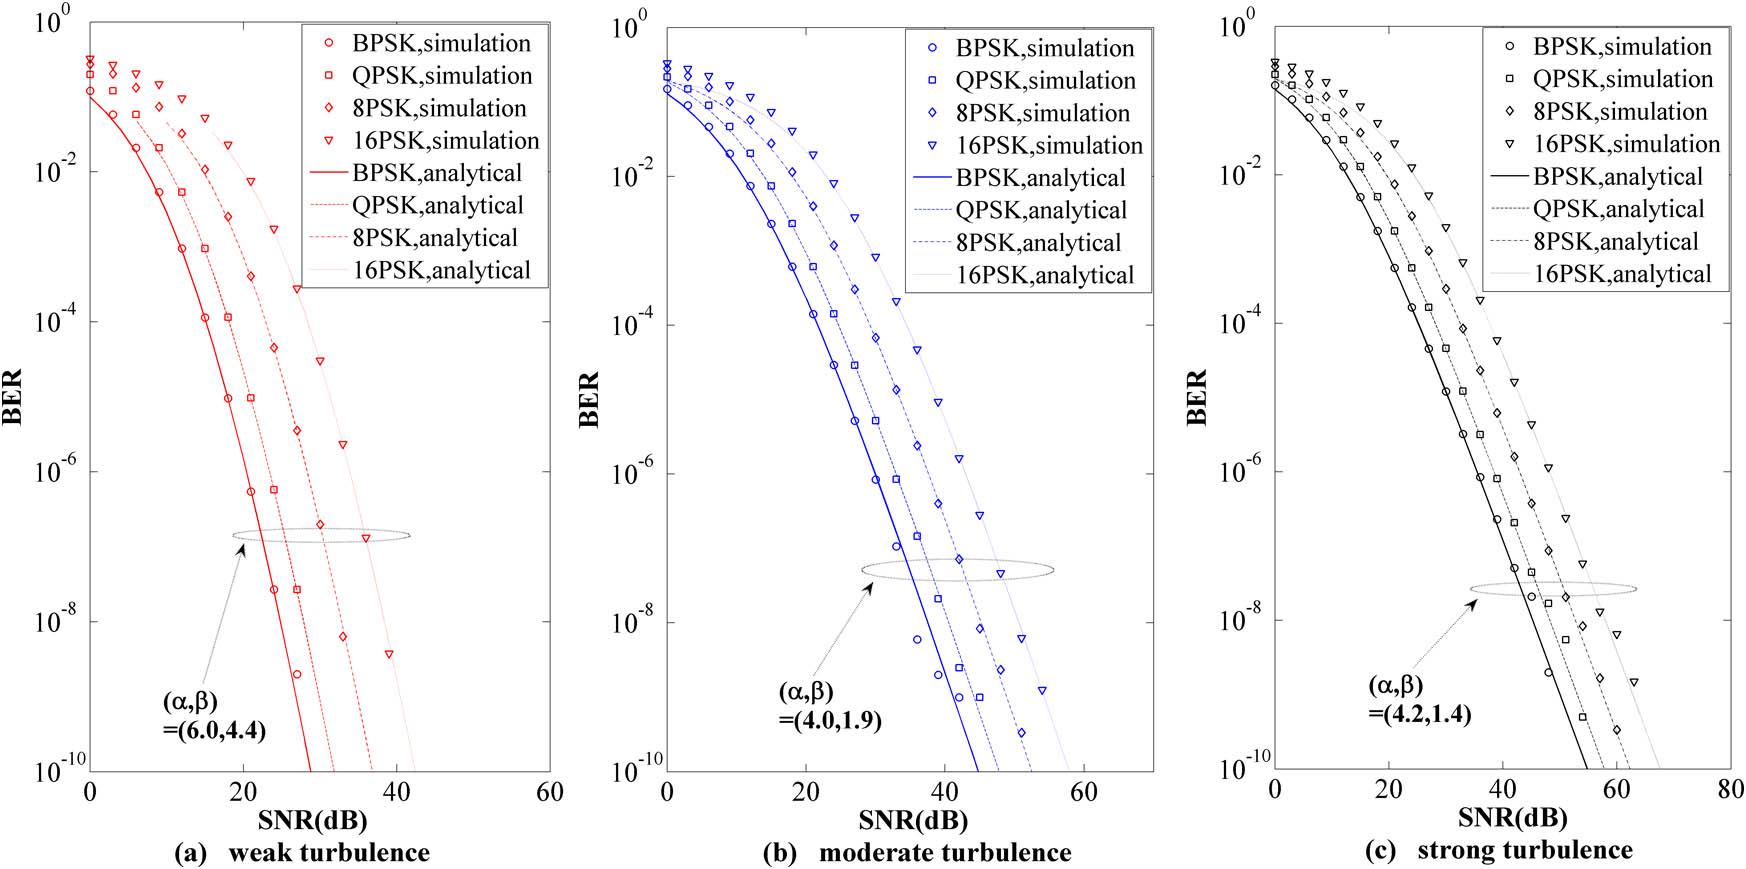 BER performance of our DF system with R=2 and C=3 in (a) weak, (b) moderate, and (c) strong turbulence conditions using BPSK, QPSK, 8PSK, and 16PSK modulations.